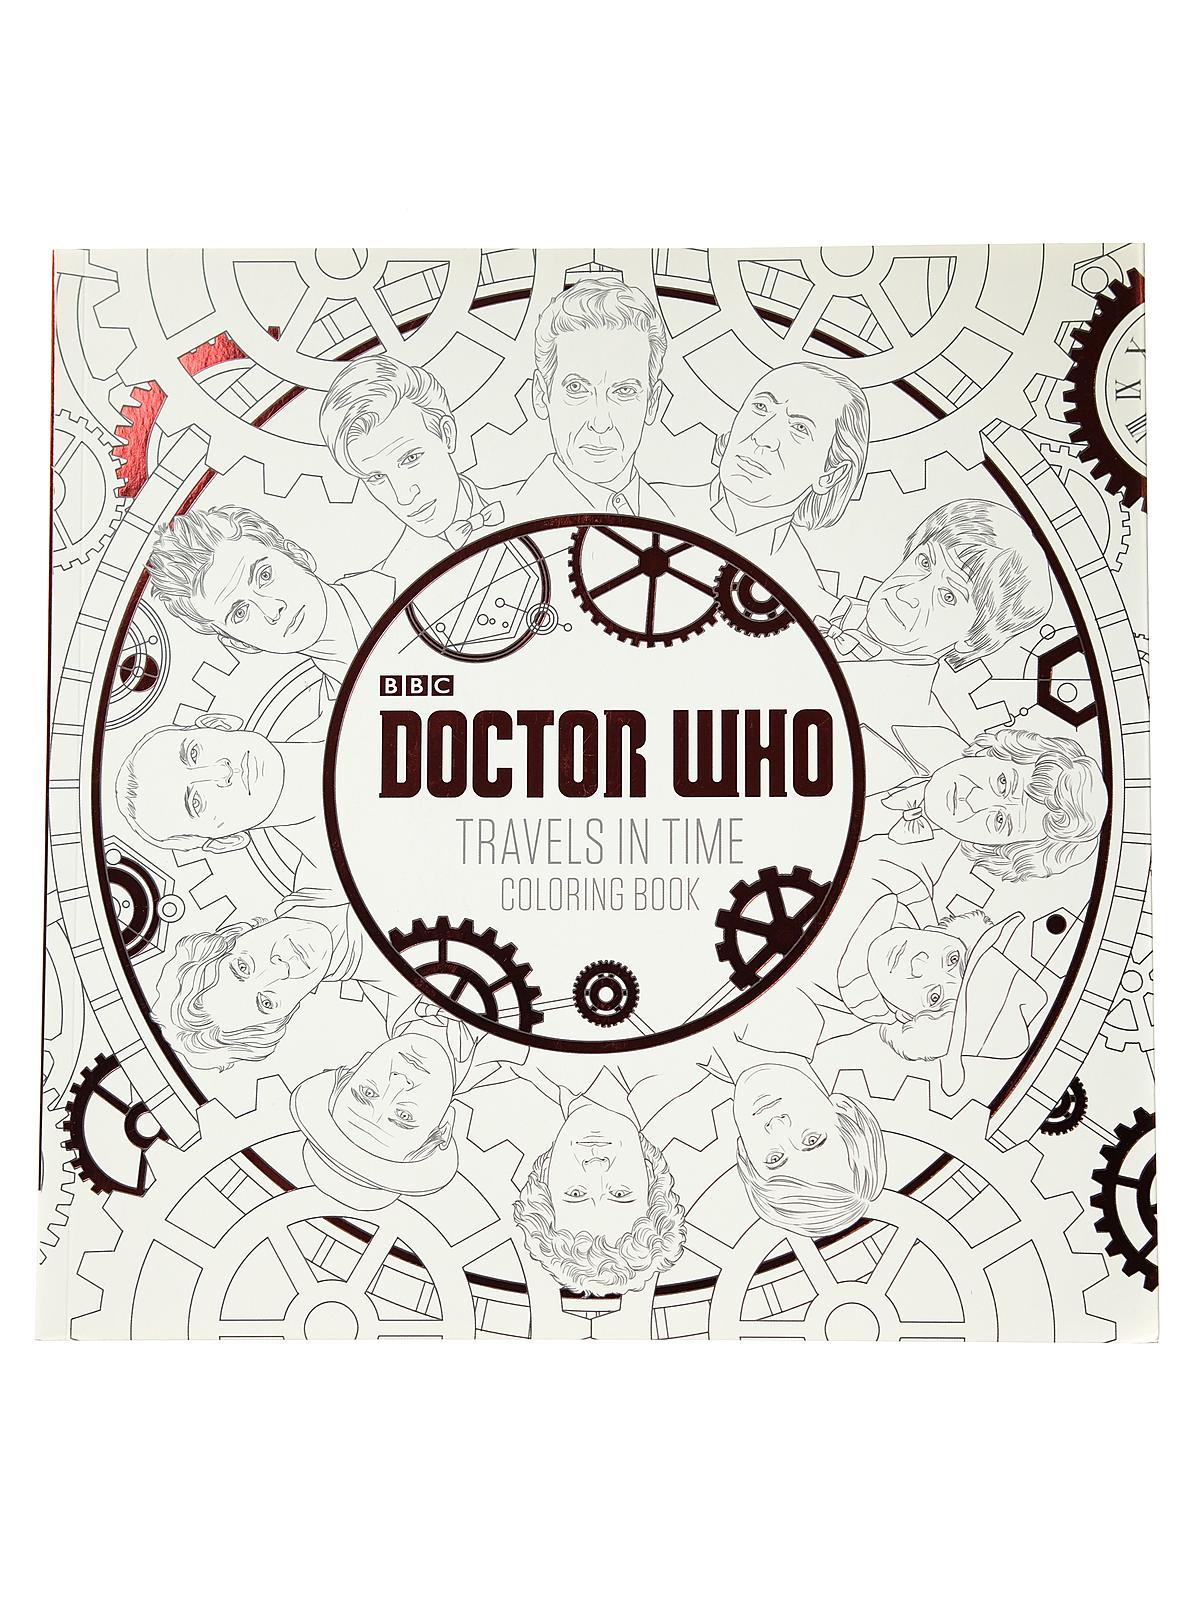 Doctor Who Travels In Time Coloring Book Each